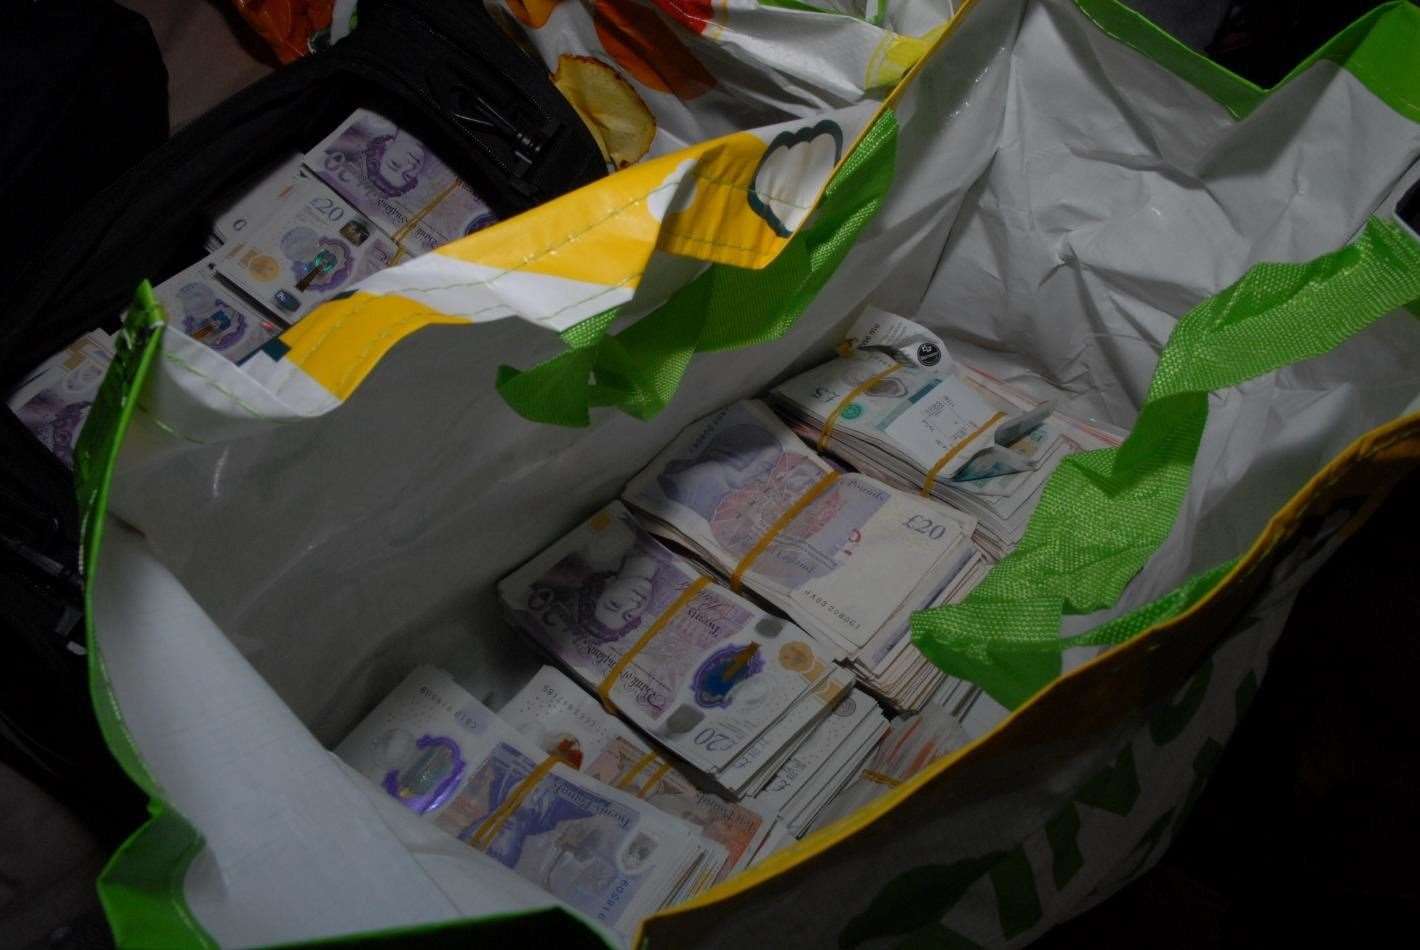 Cash uncovered in an Asda supermarket bag at his home in Sinclair Way, Dartford